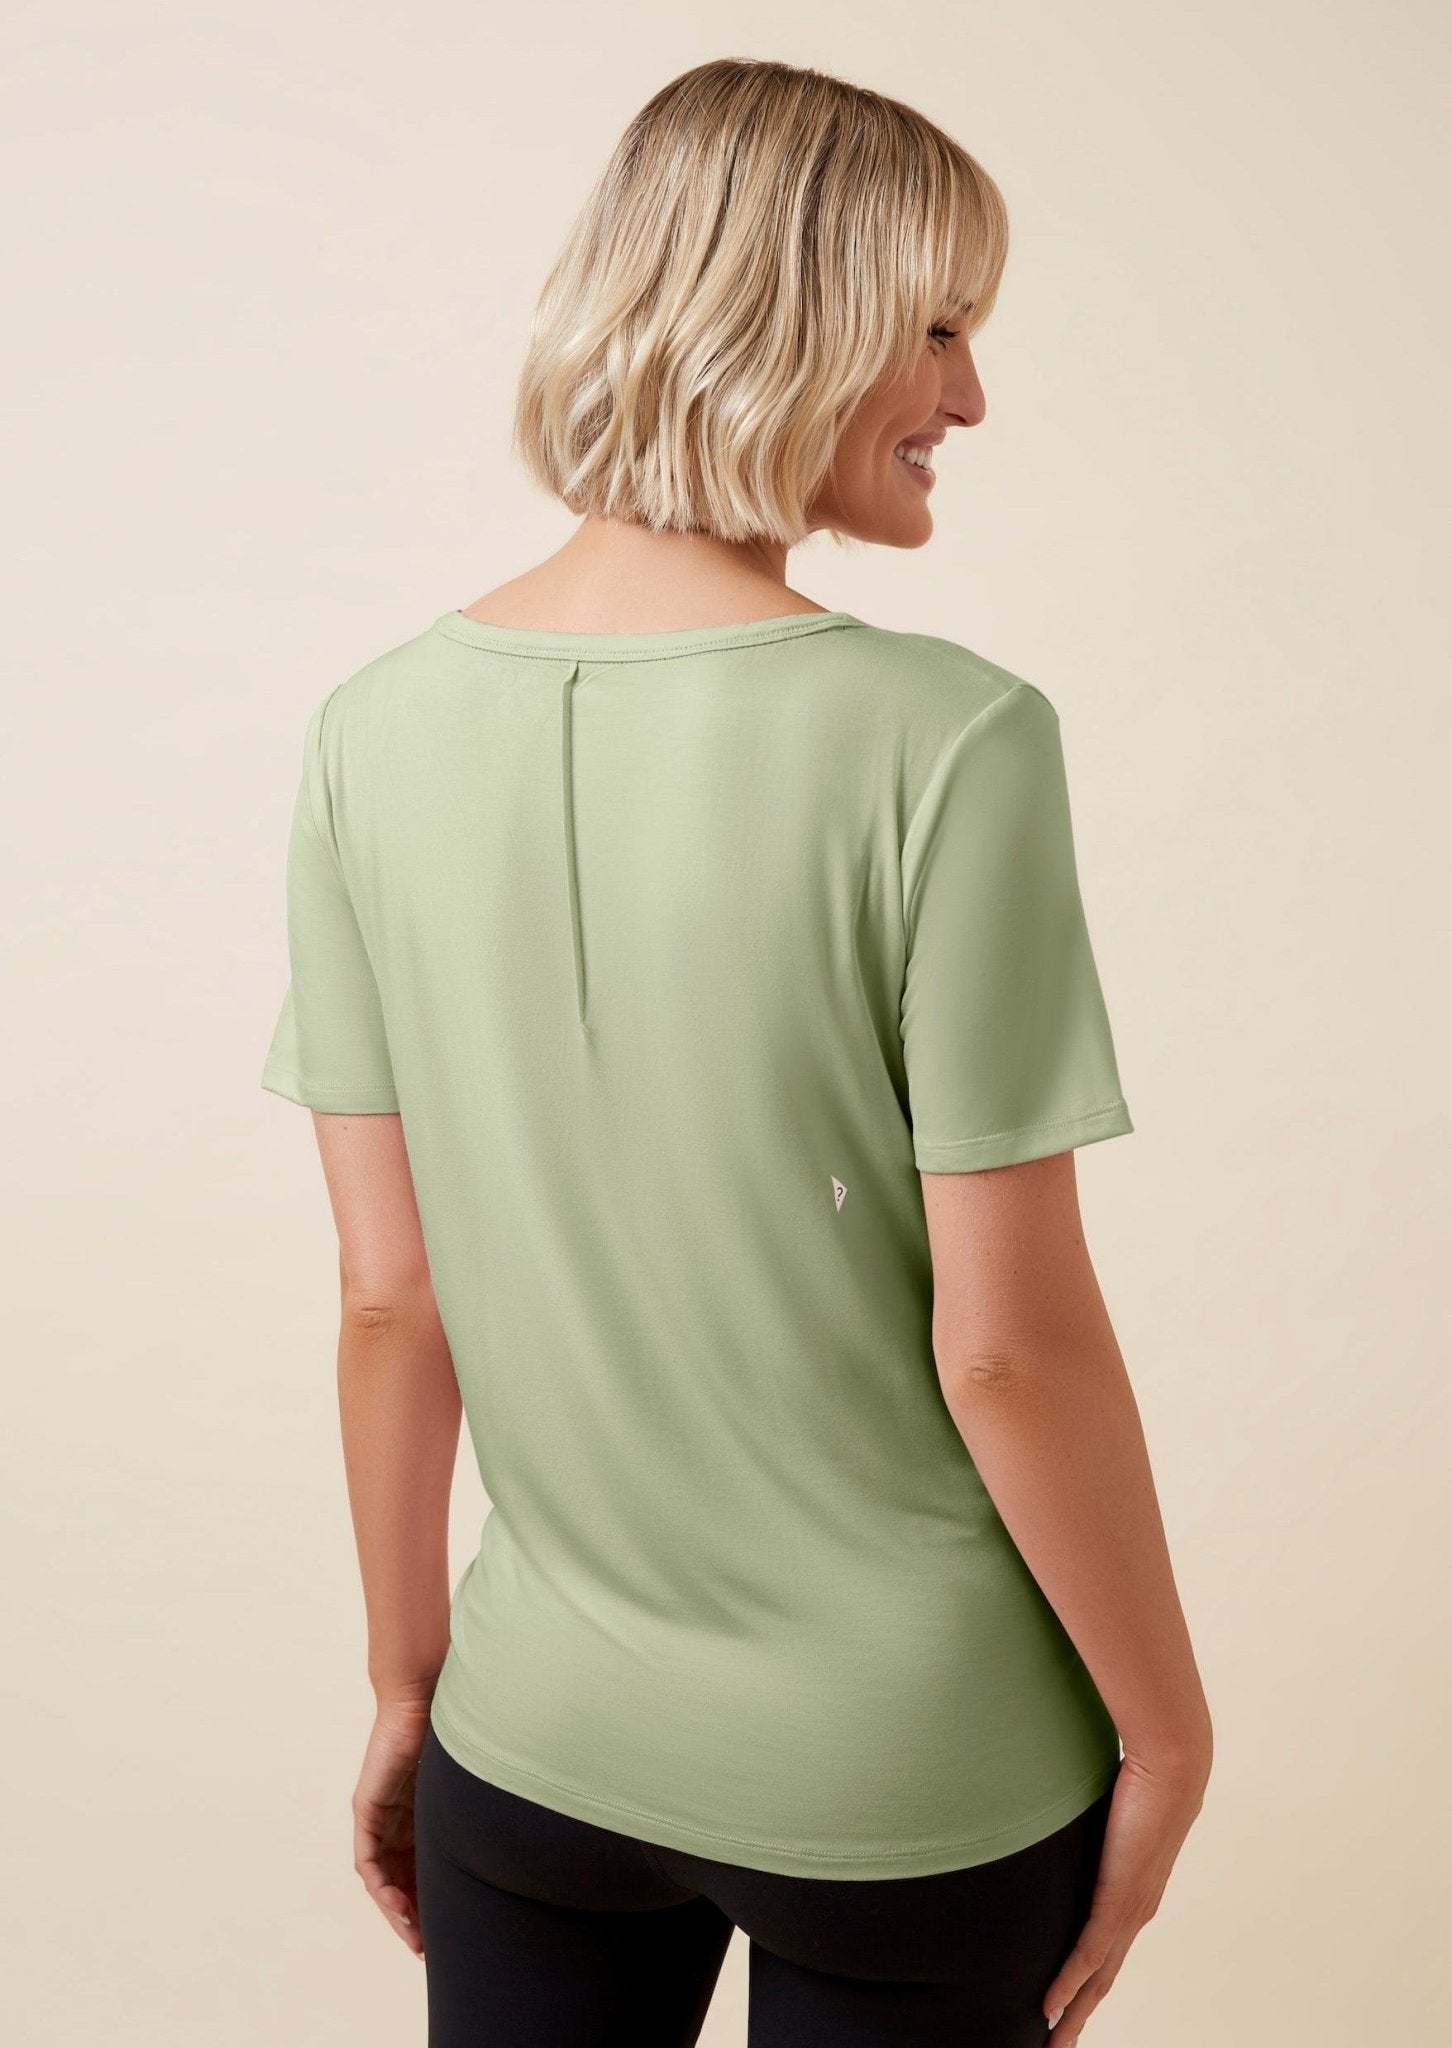 Thery Group TEE Calm Khaki The Me Slouch bamboo Tee -back view